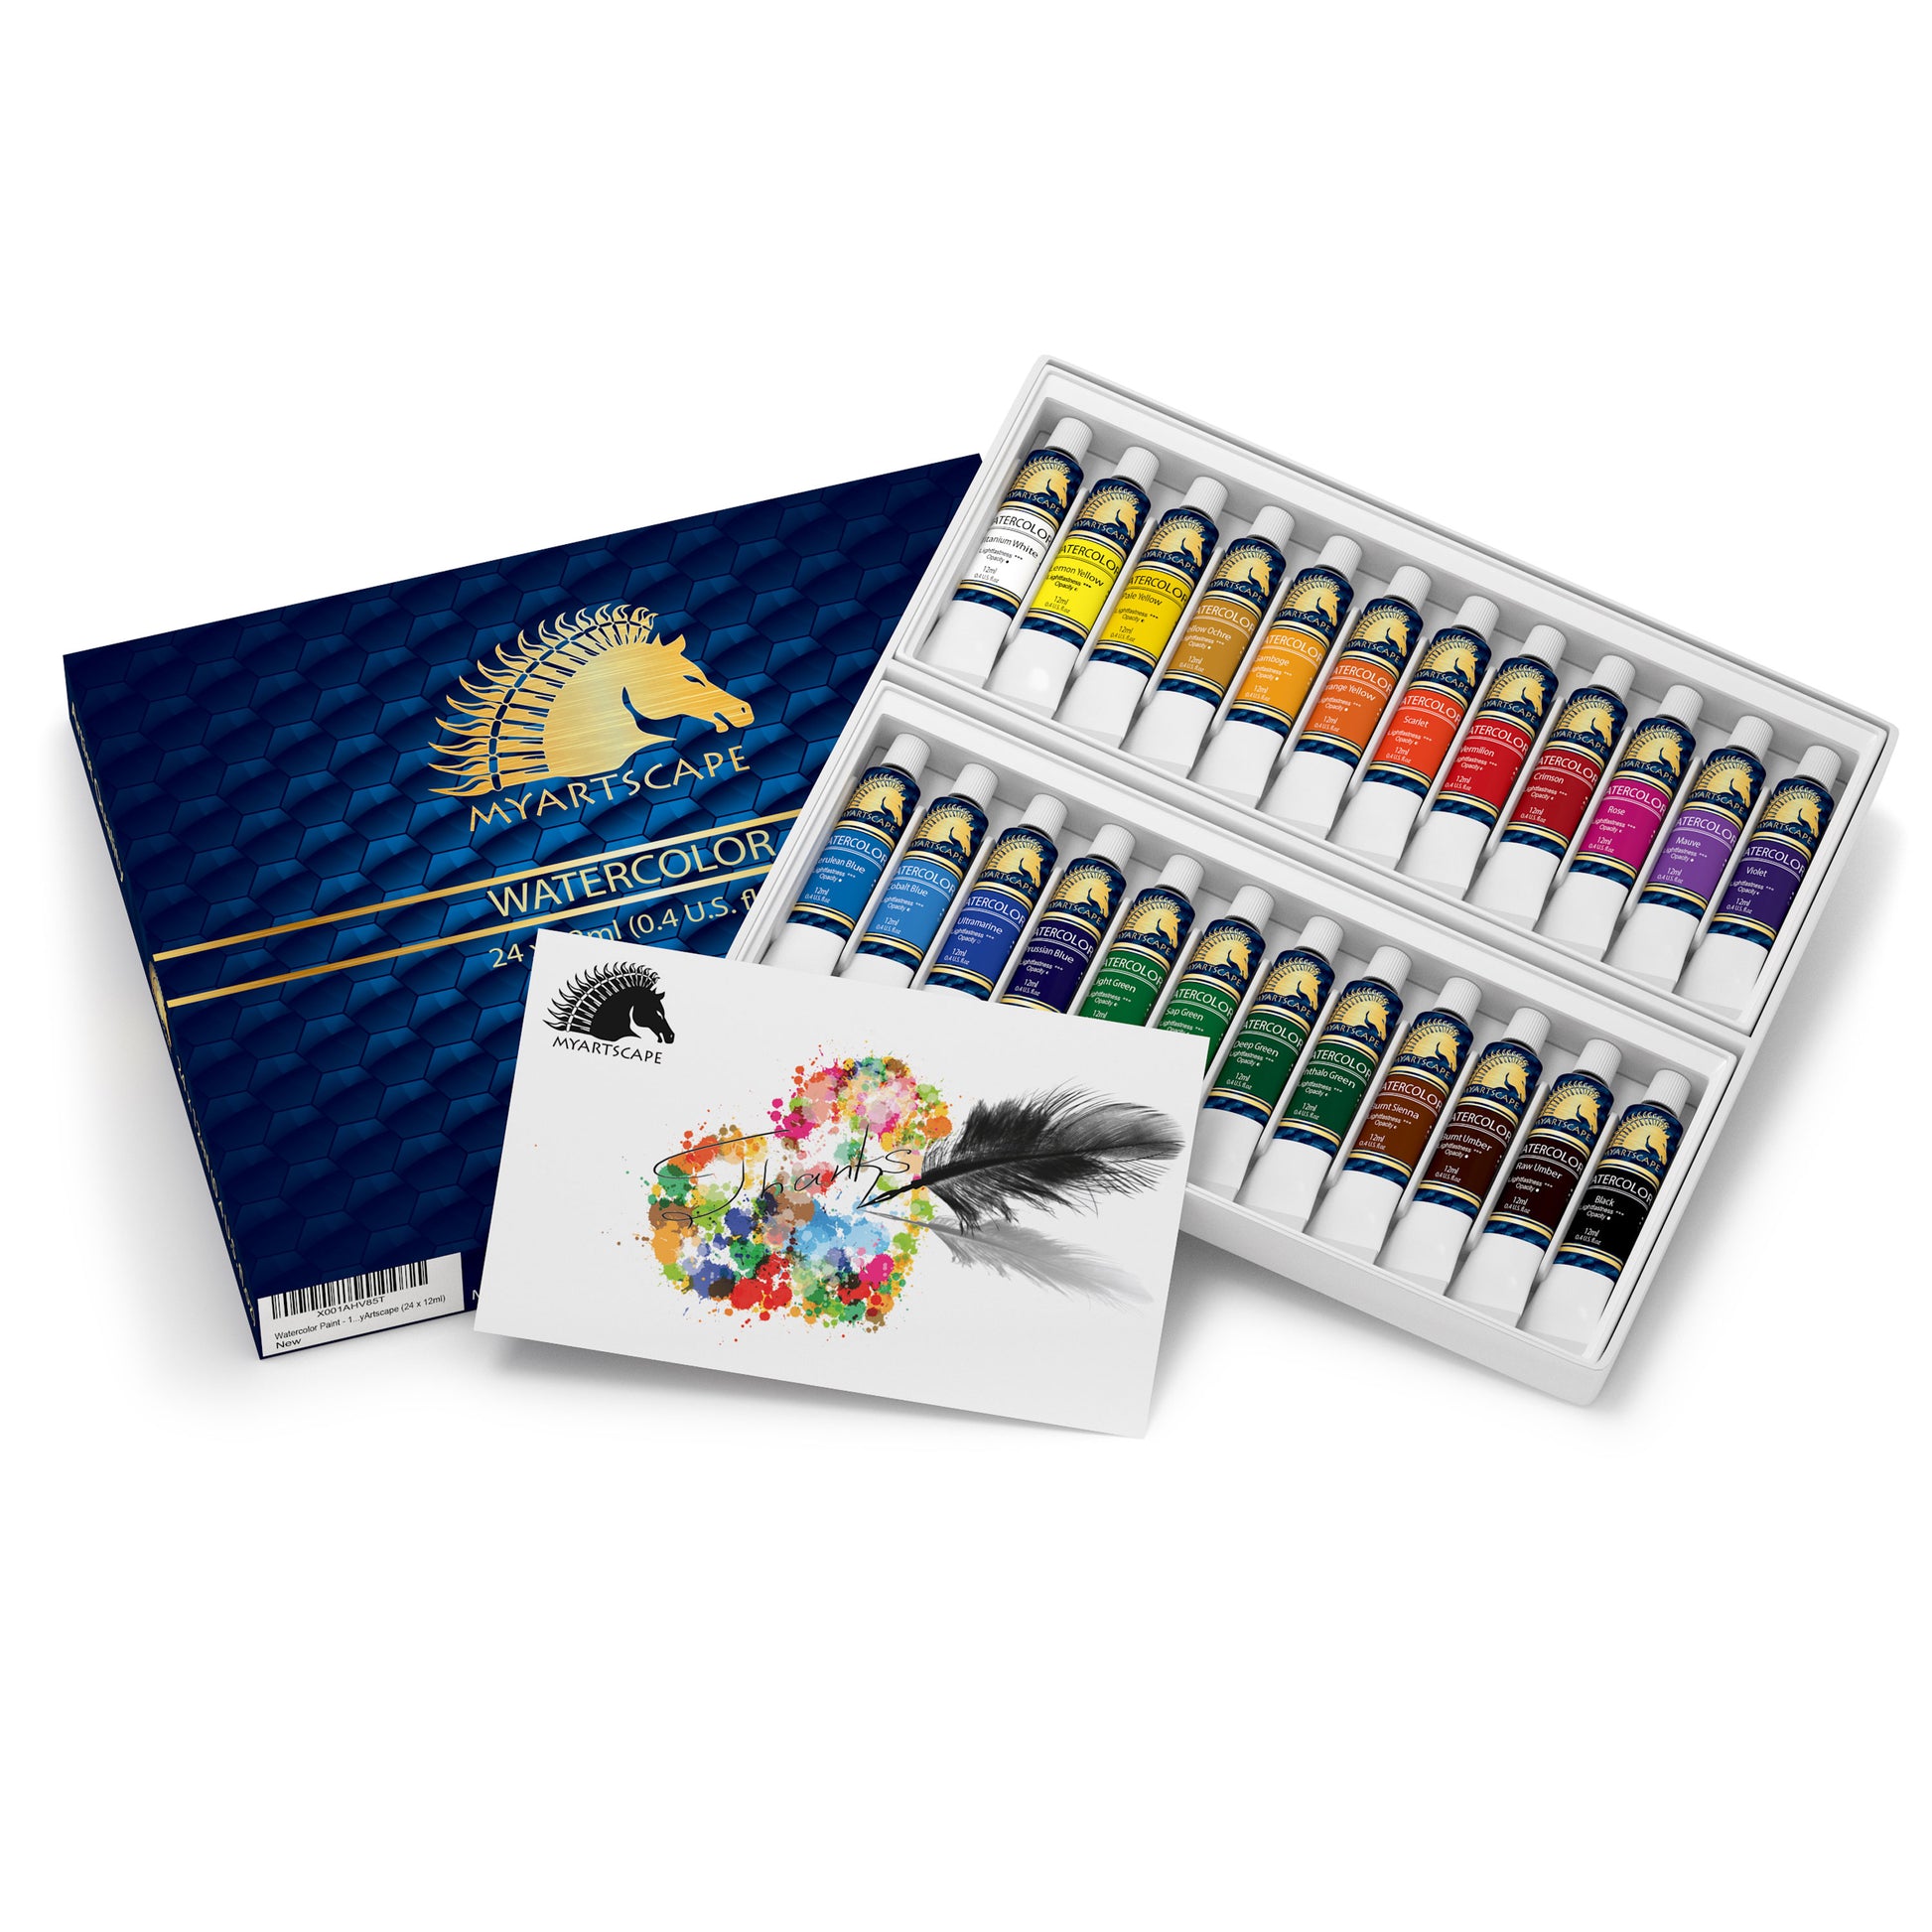  Cptoion 24 Pack Watercolor Paint for Kids,12 Colors